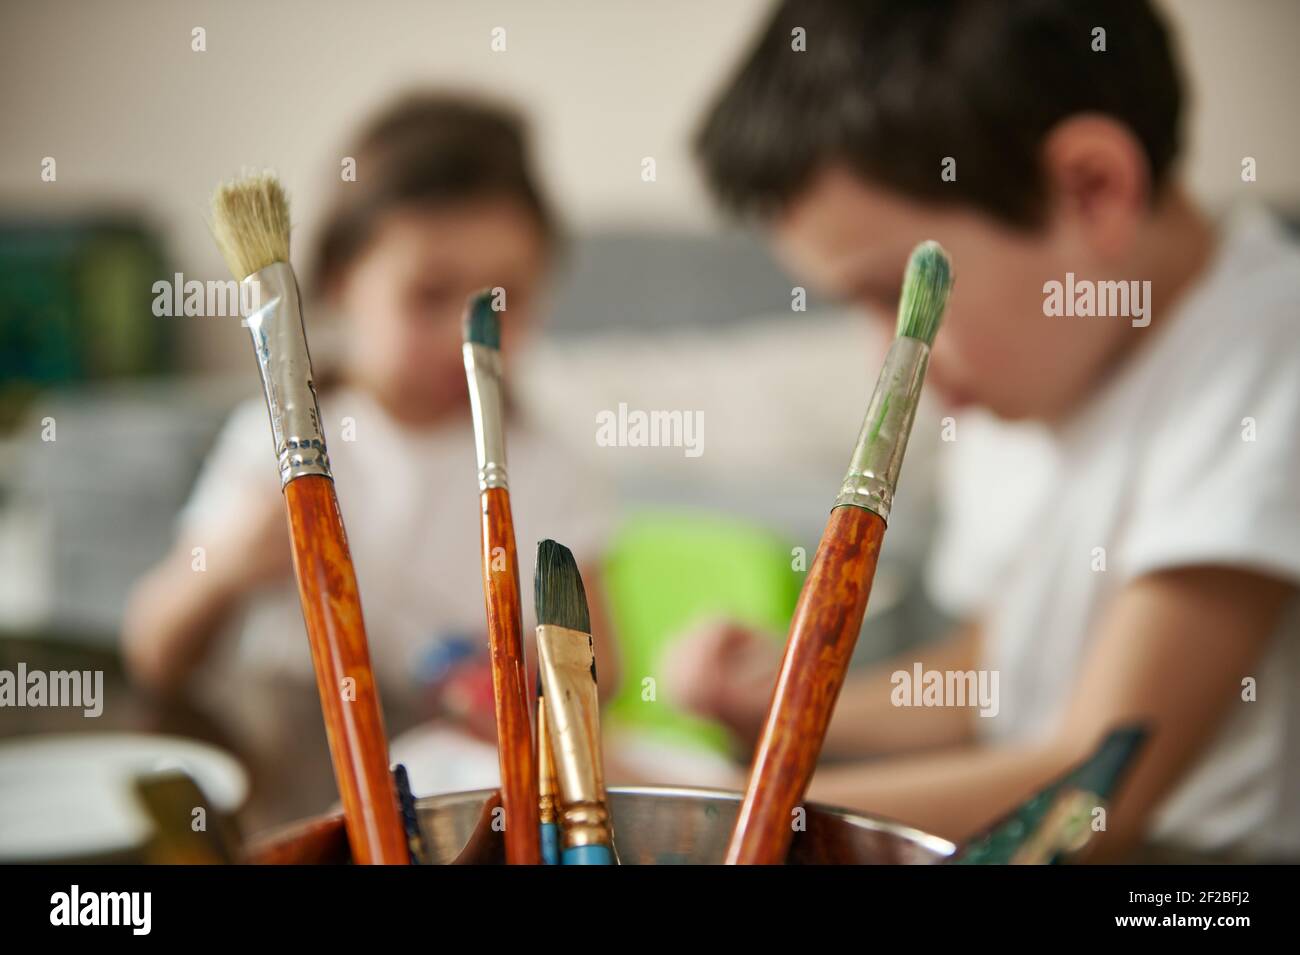 Closeup of different paint brushes on the background of blurred children concentrate on decorating eggs for Easter Stock Photo